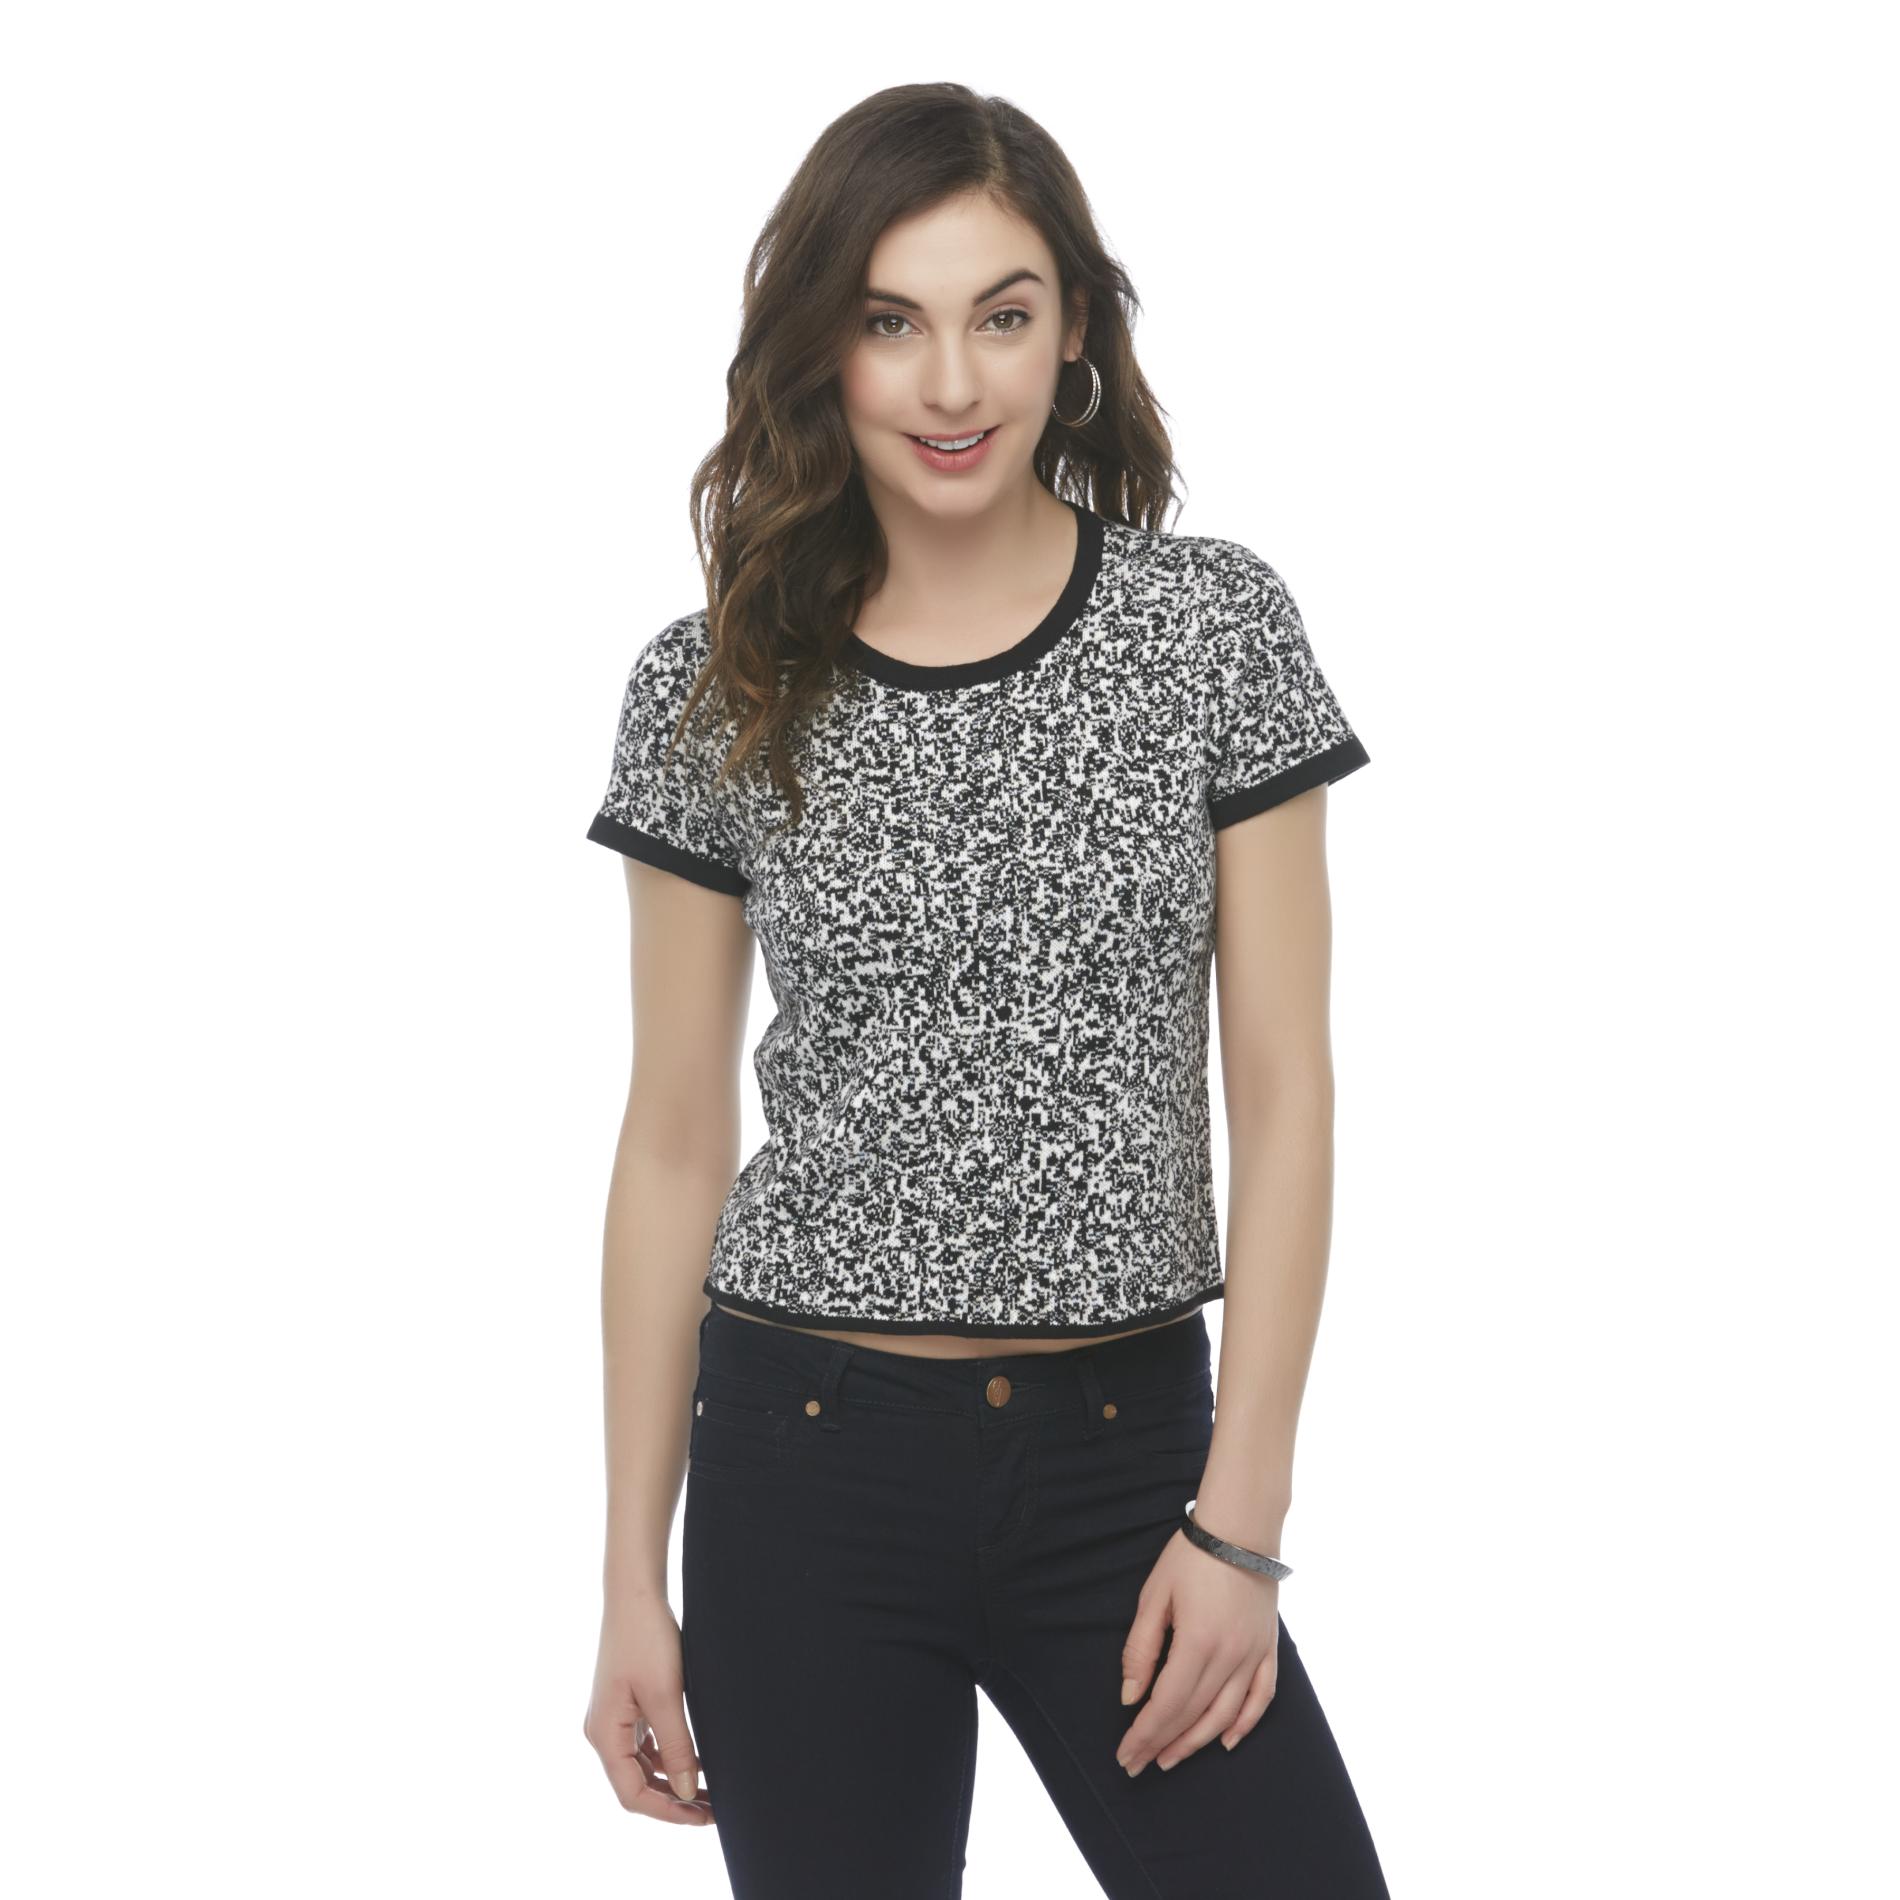 Attention Women's Short-Sleeve Sweater - Abstract